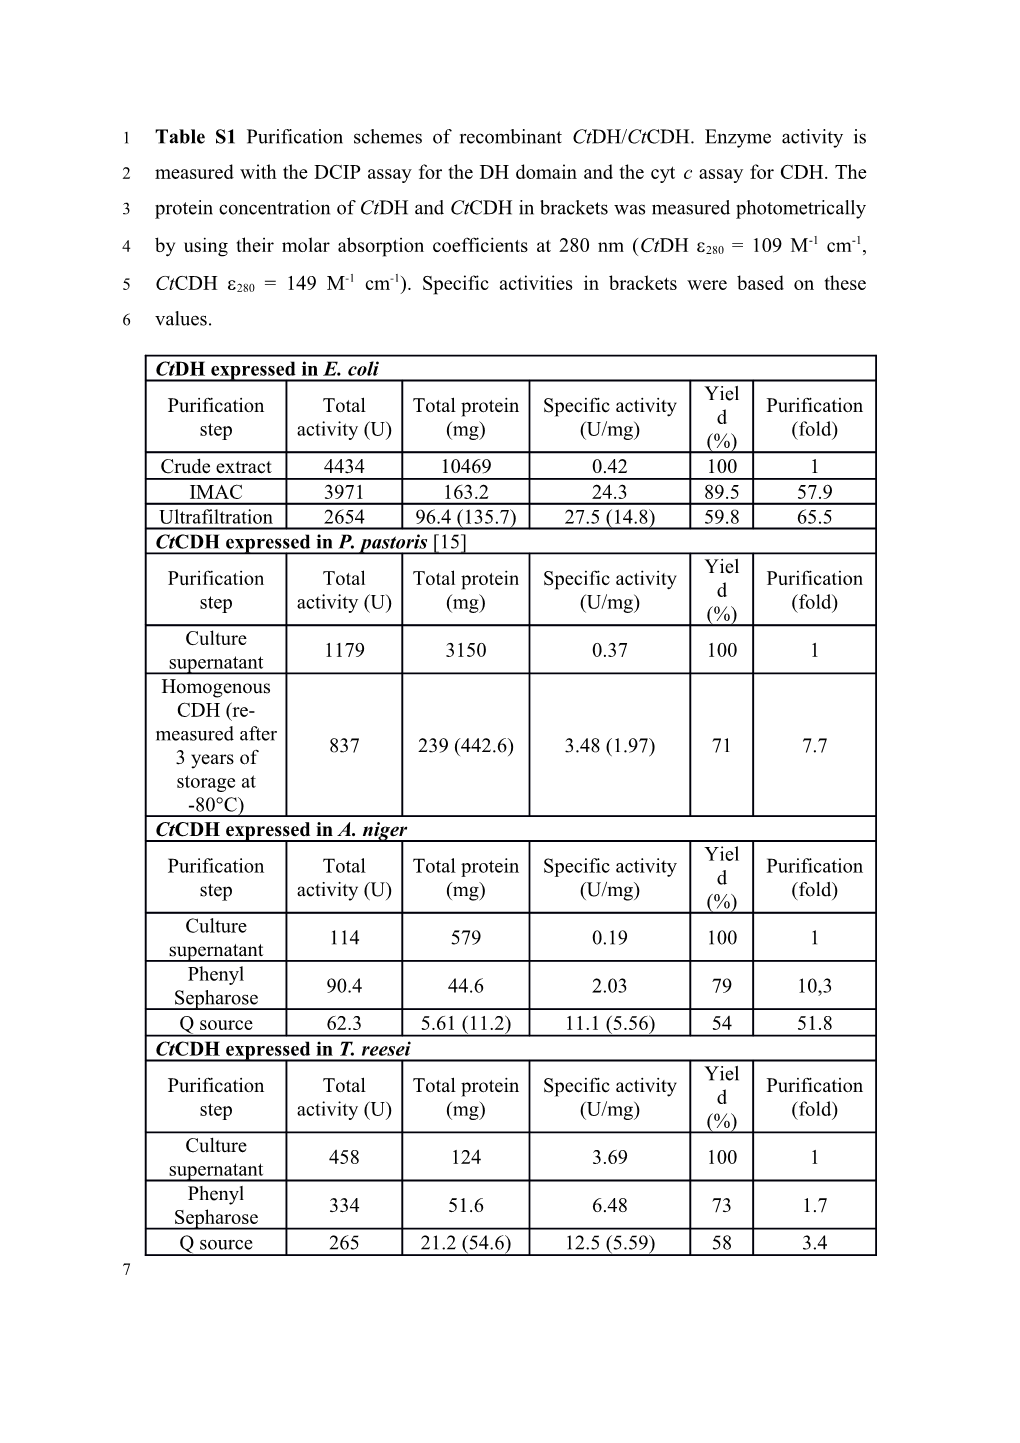 Table S2 Comparison of Recombinant DH Domain and Intact Cdhs from Literatures